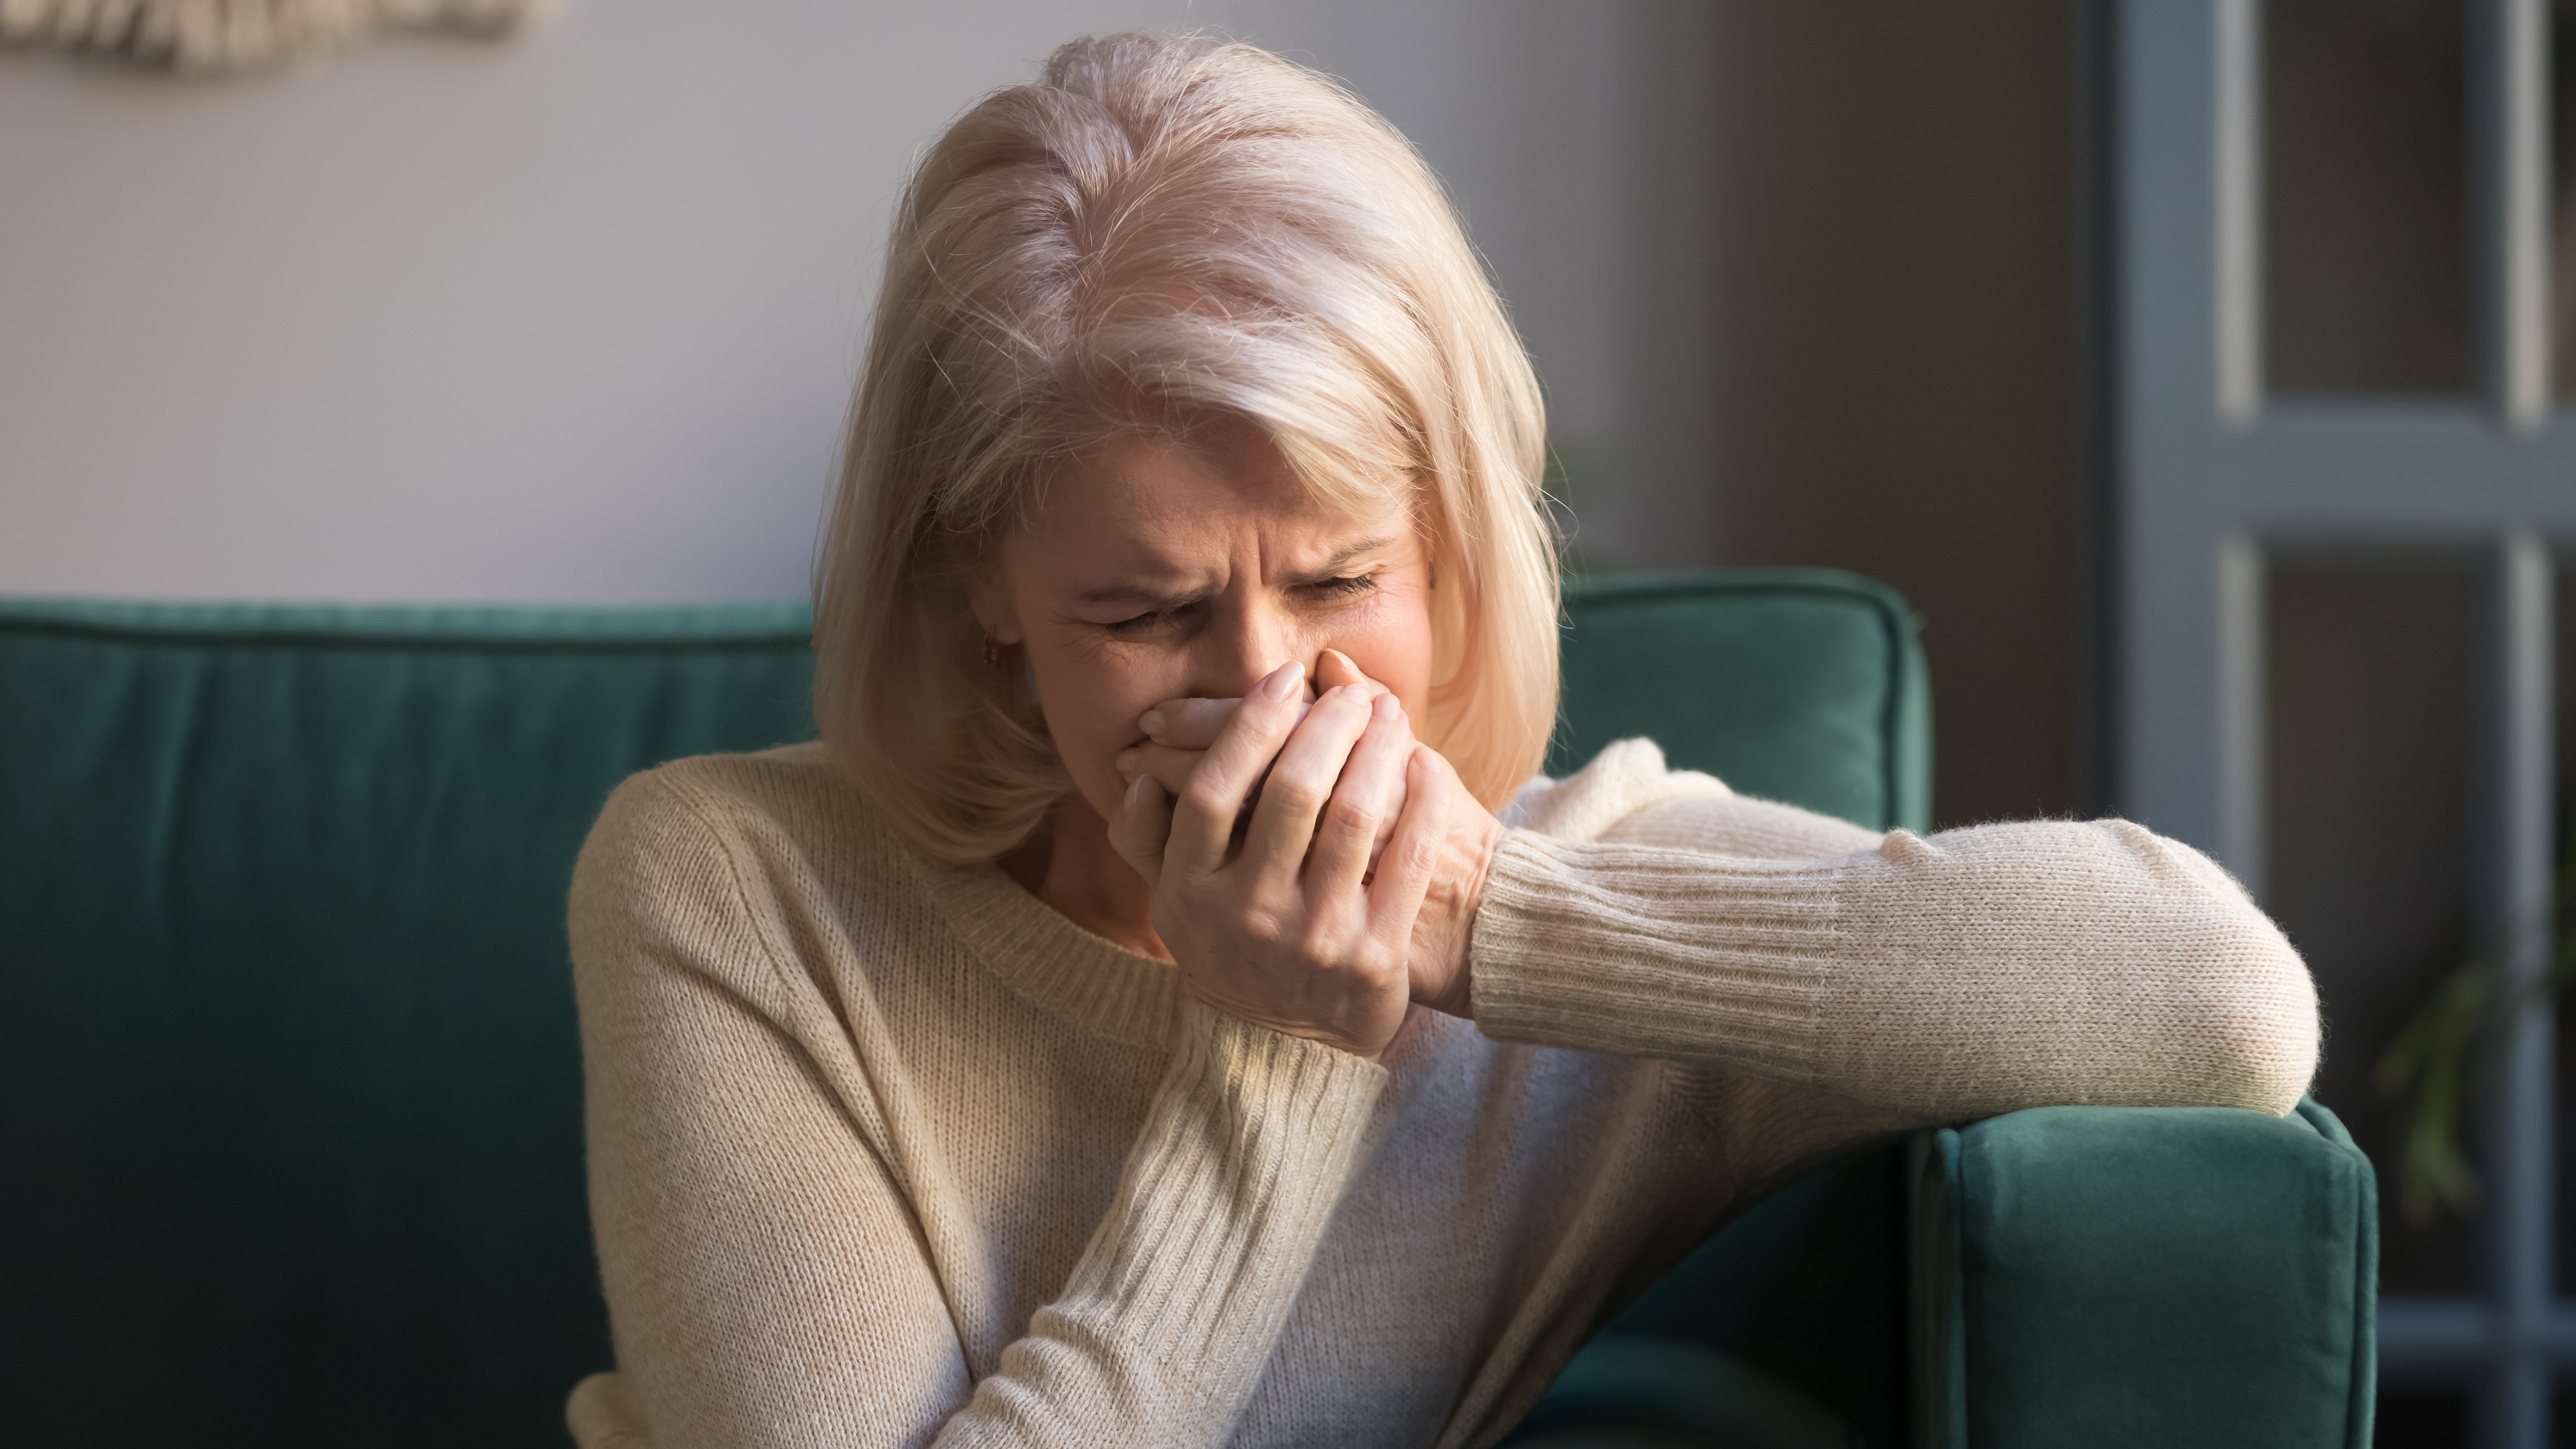 A senior woman crying while sitting on the sofa | Source: Shutterstock